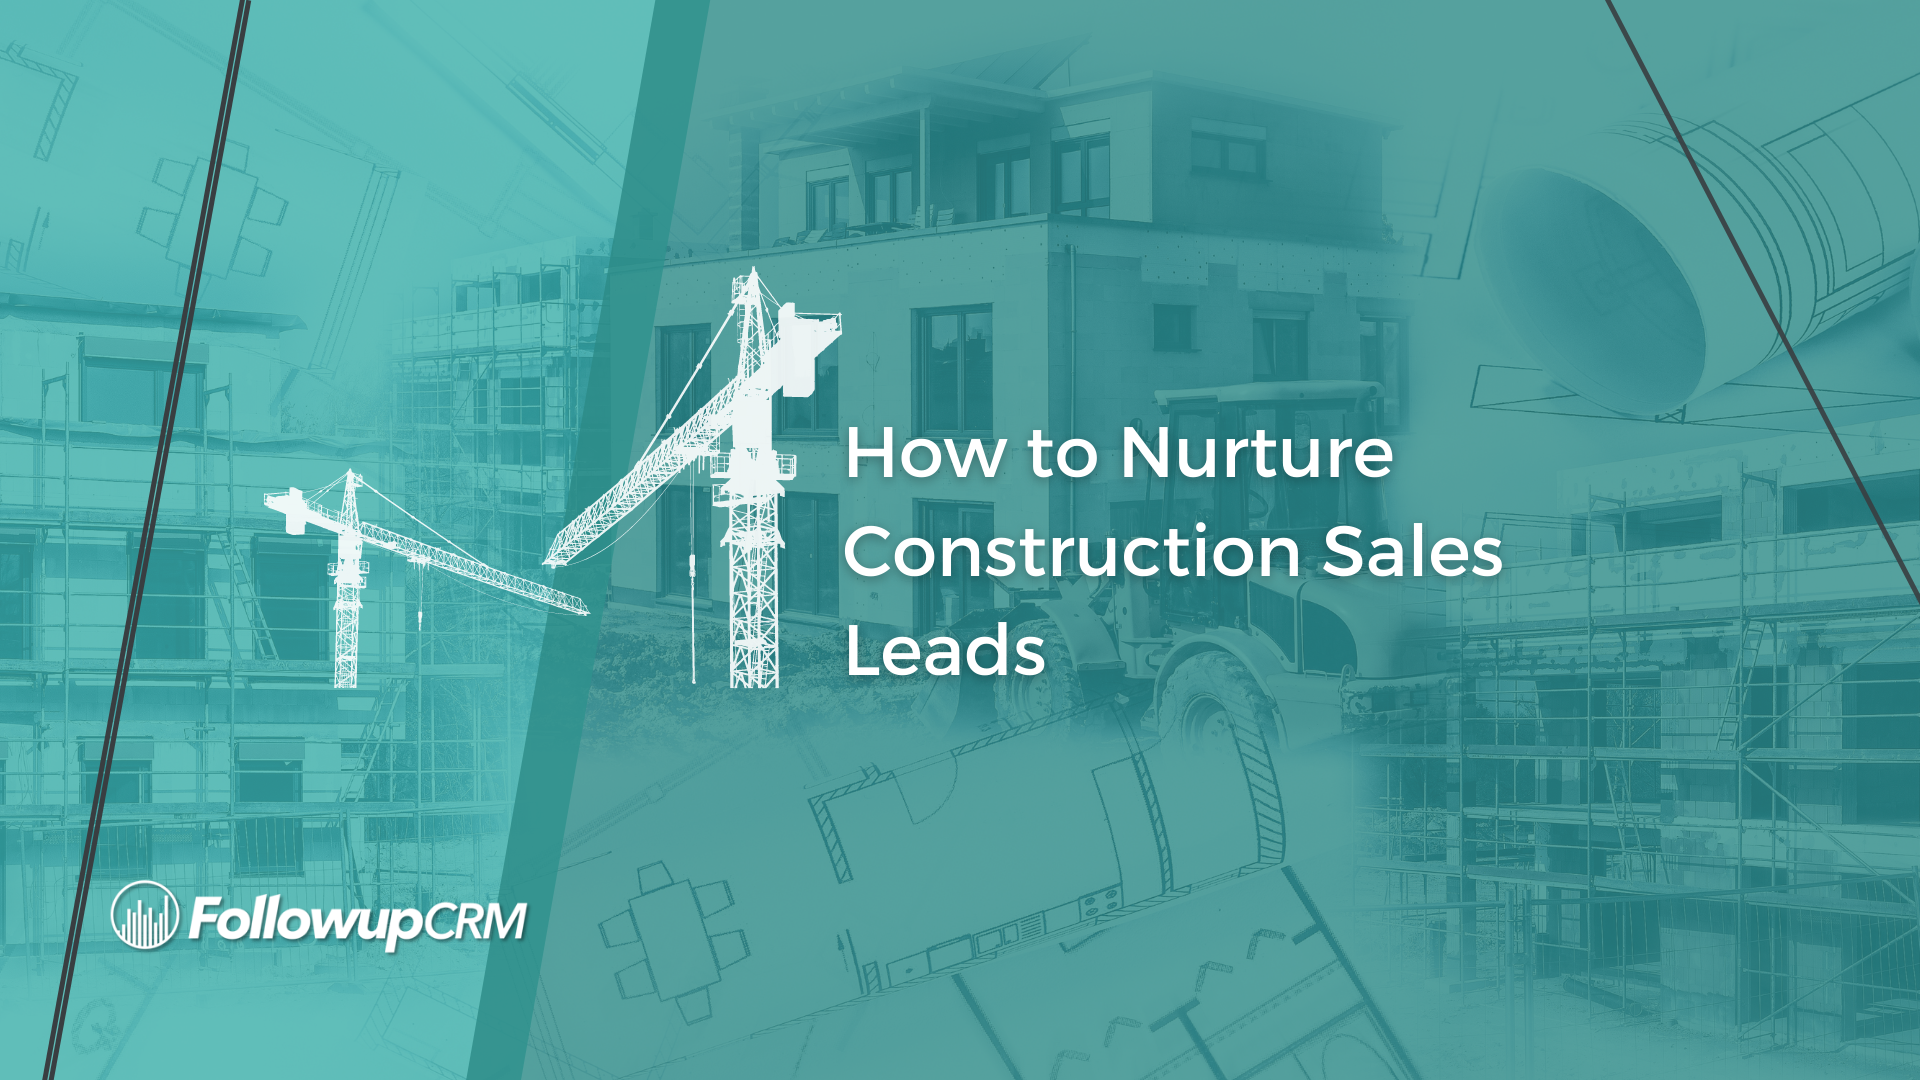 How to Nurture Construction Sales Leads